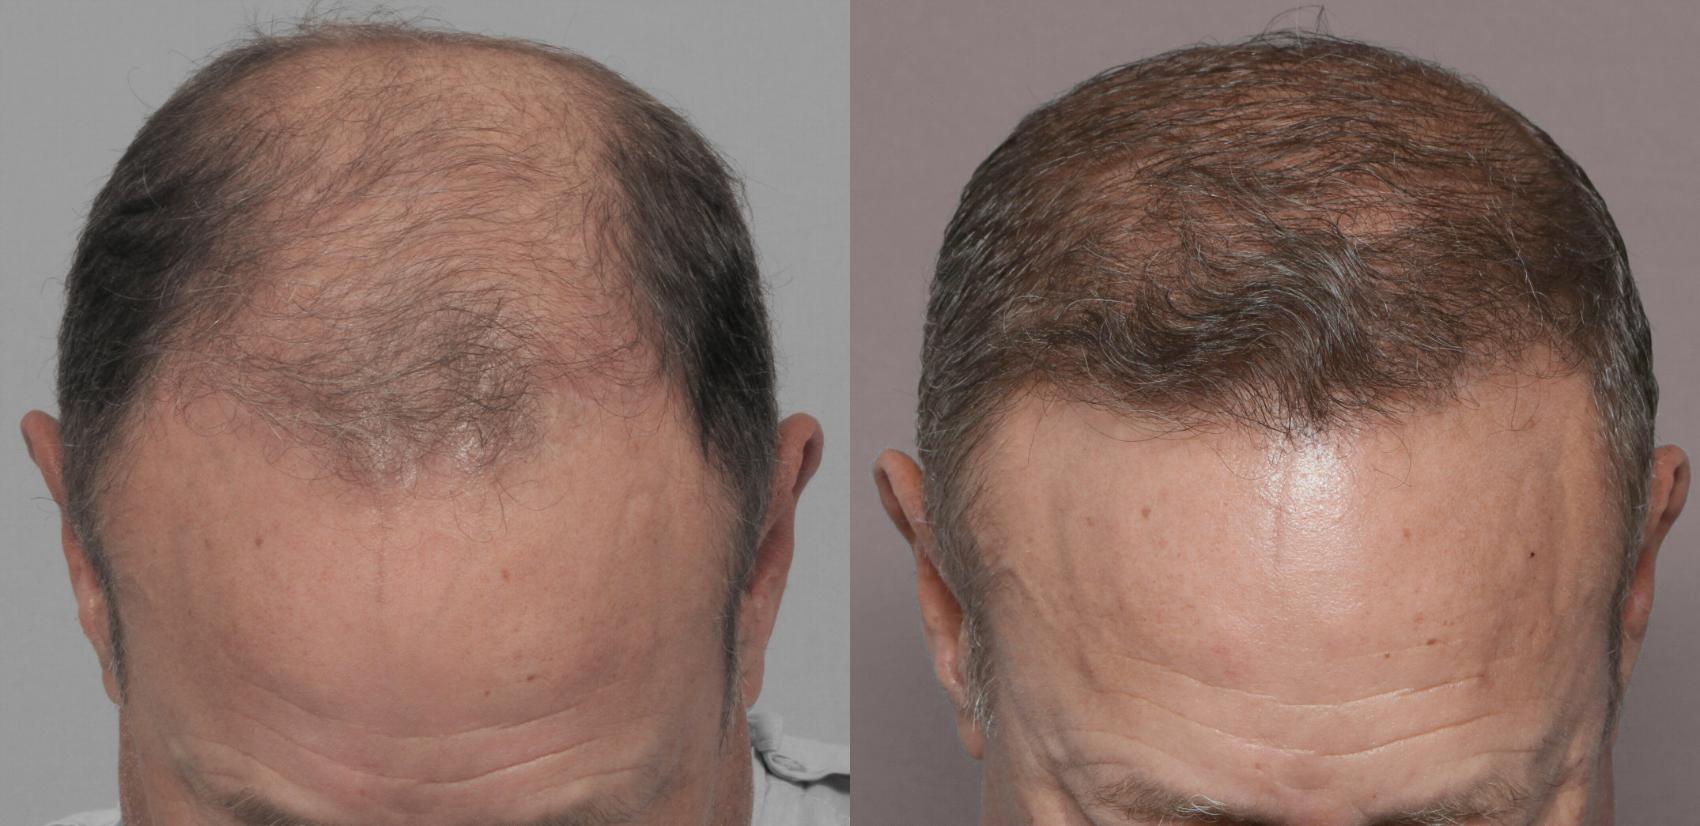 Pre-Treatment Frontal View of NeoGraft Hair Restoration by Dr. Hasen